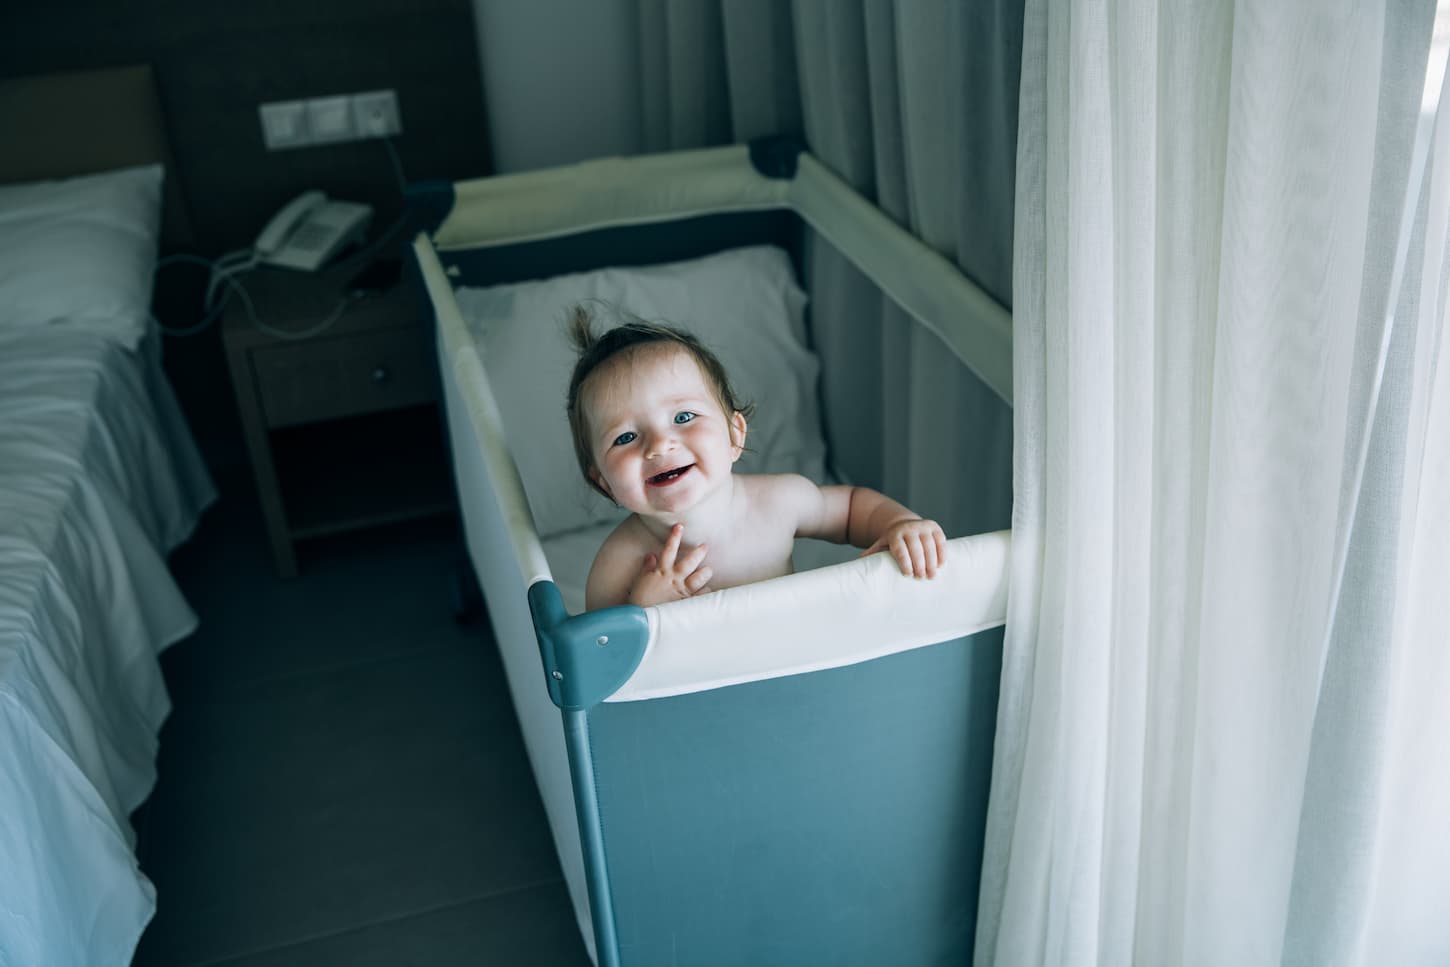 An image of a little baby who just woke up in a good mood and smiling in her crib looking at the camera.